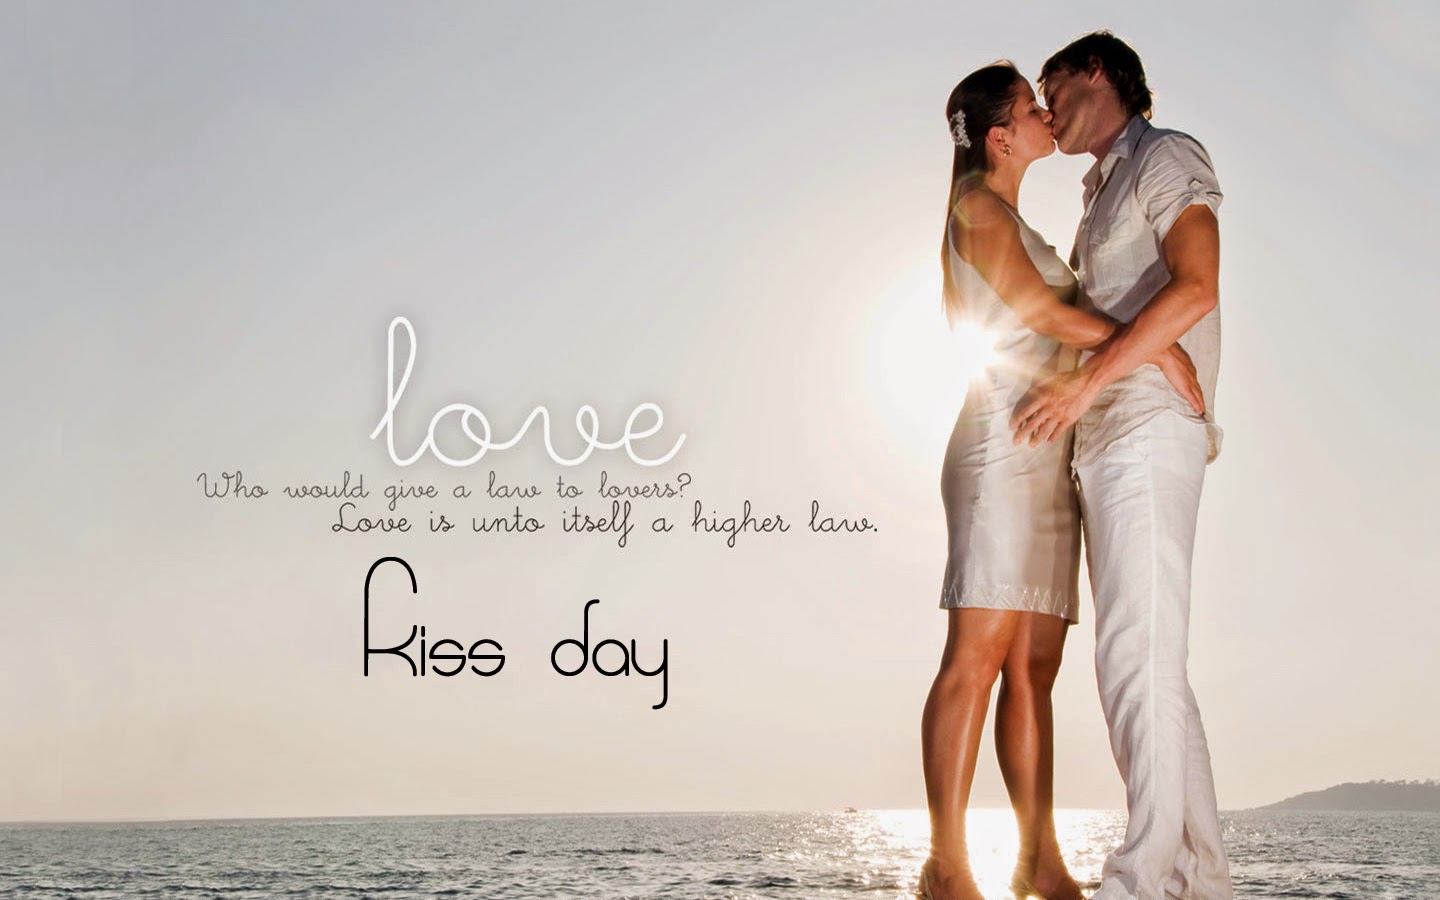 Happy Kiss Day Messages, Sms, Wallpapers For Boyfriend ...